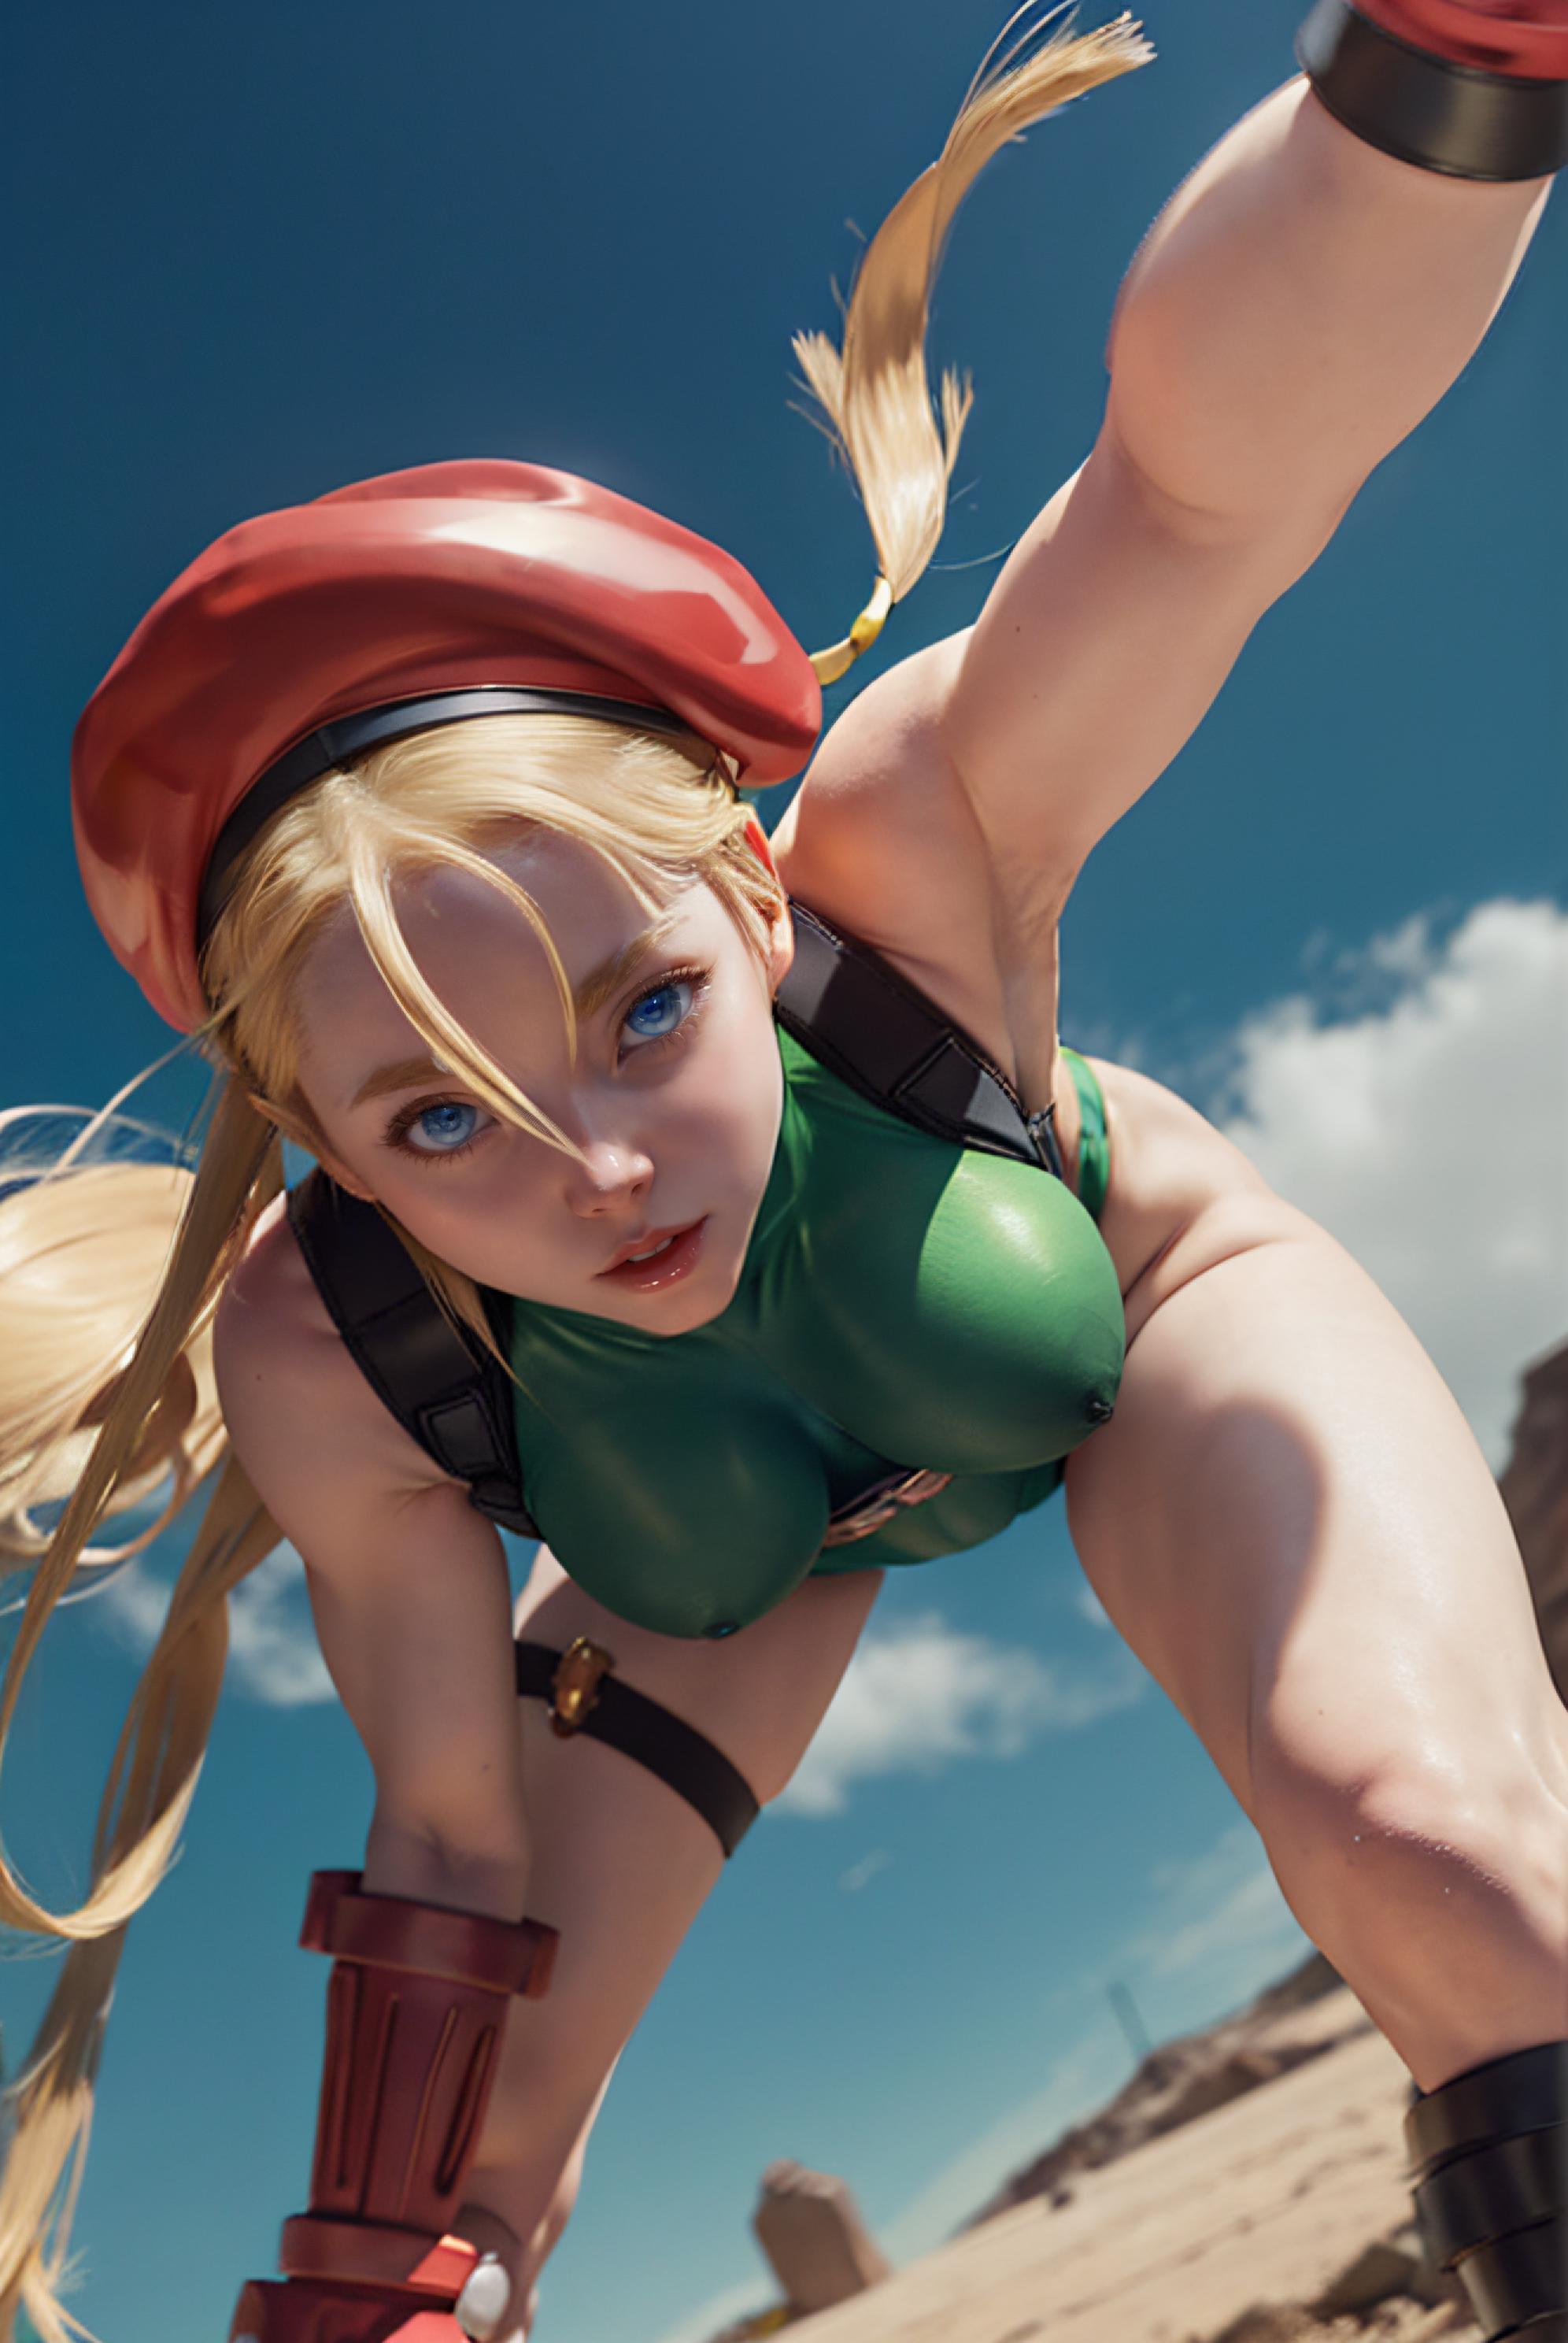 Cammy White / Street Fighter image by yomama123556778